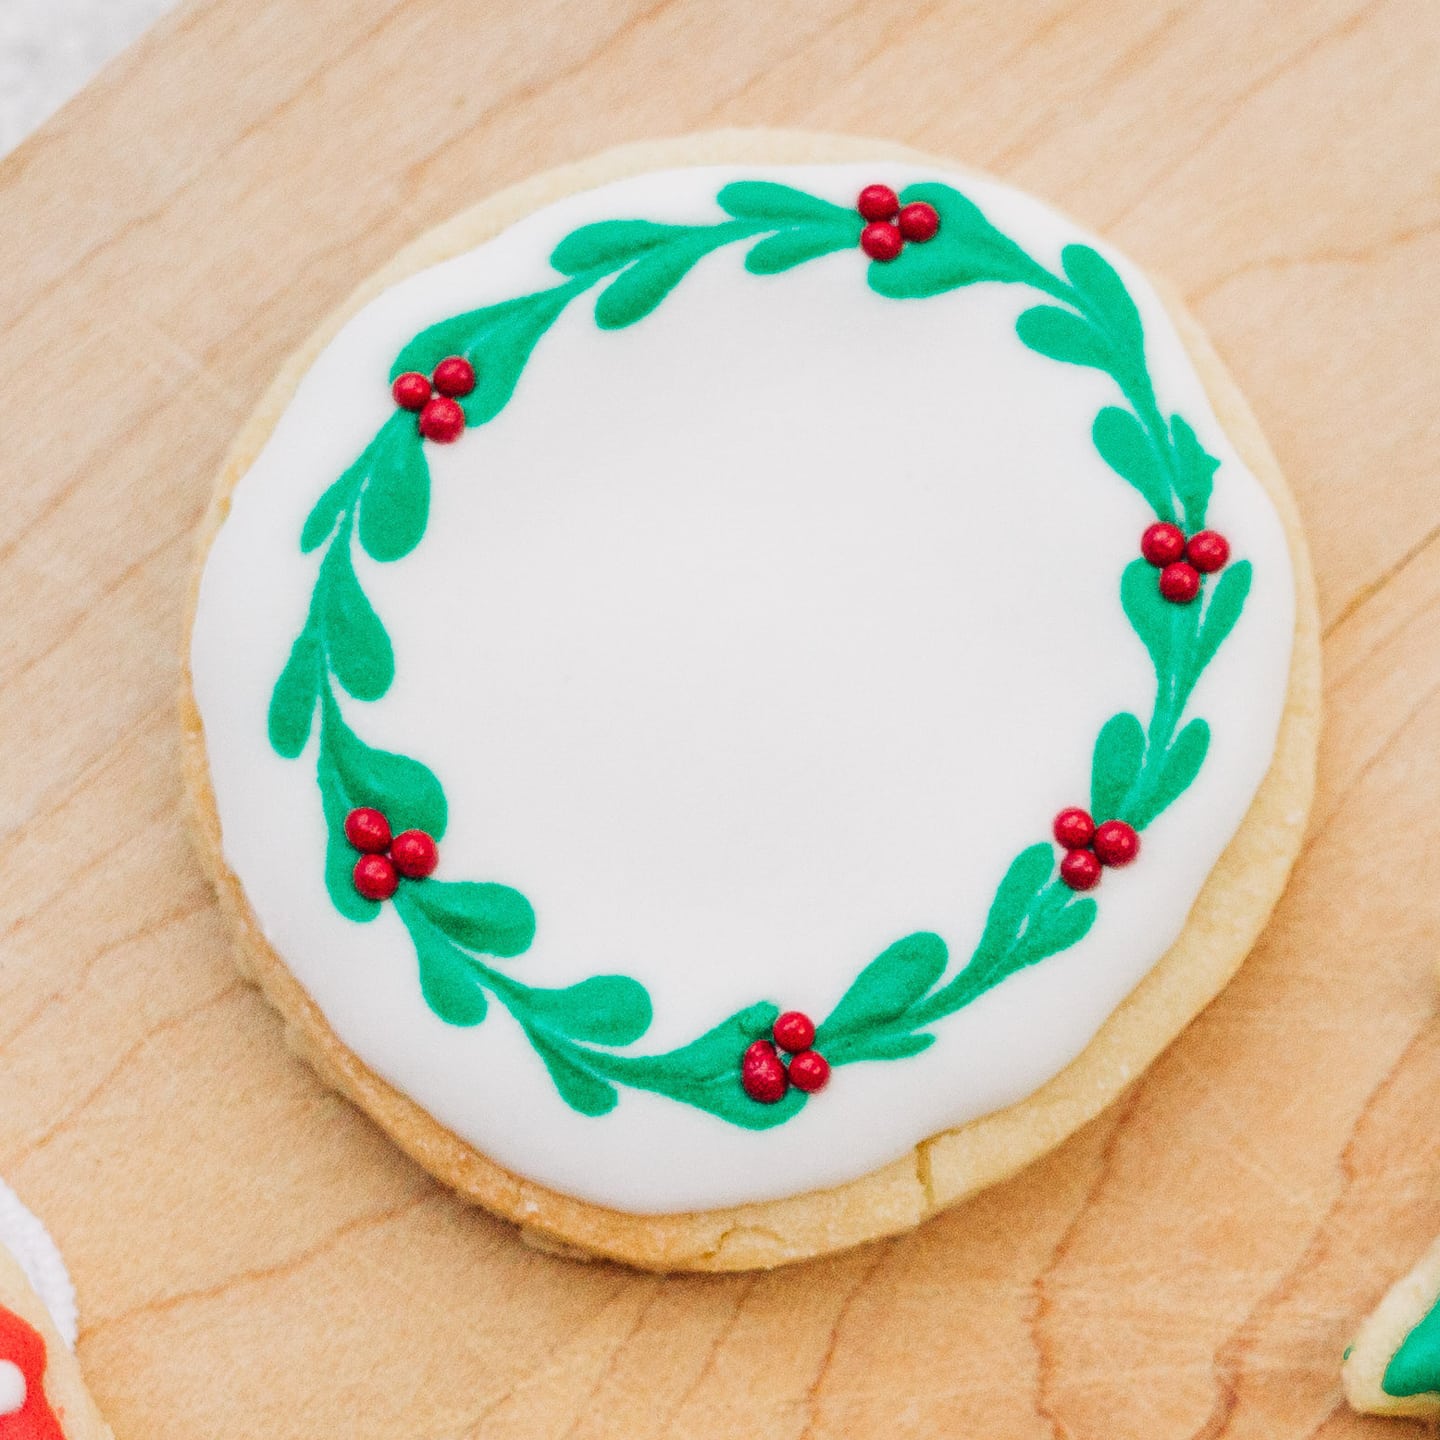 Round sugar cookie decorated as a Christmas wreath